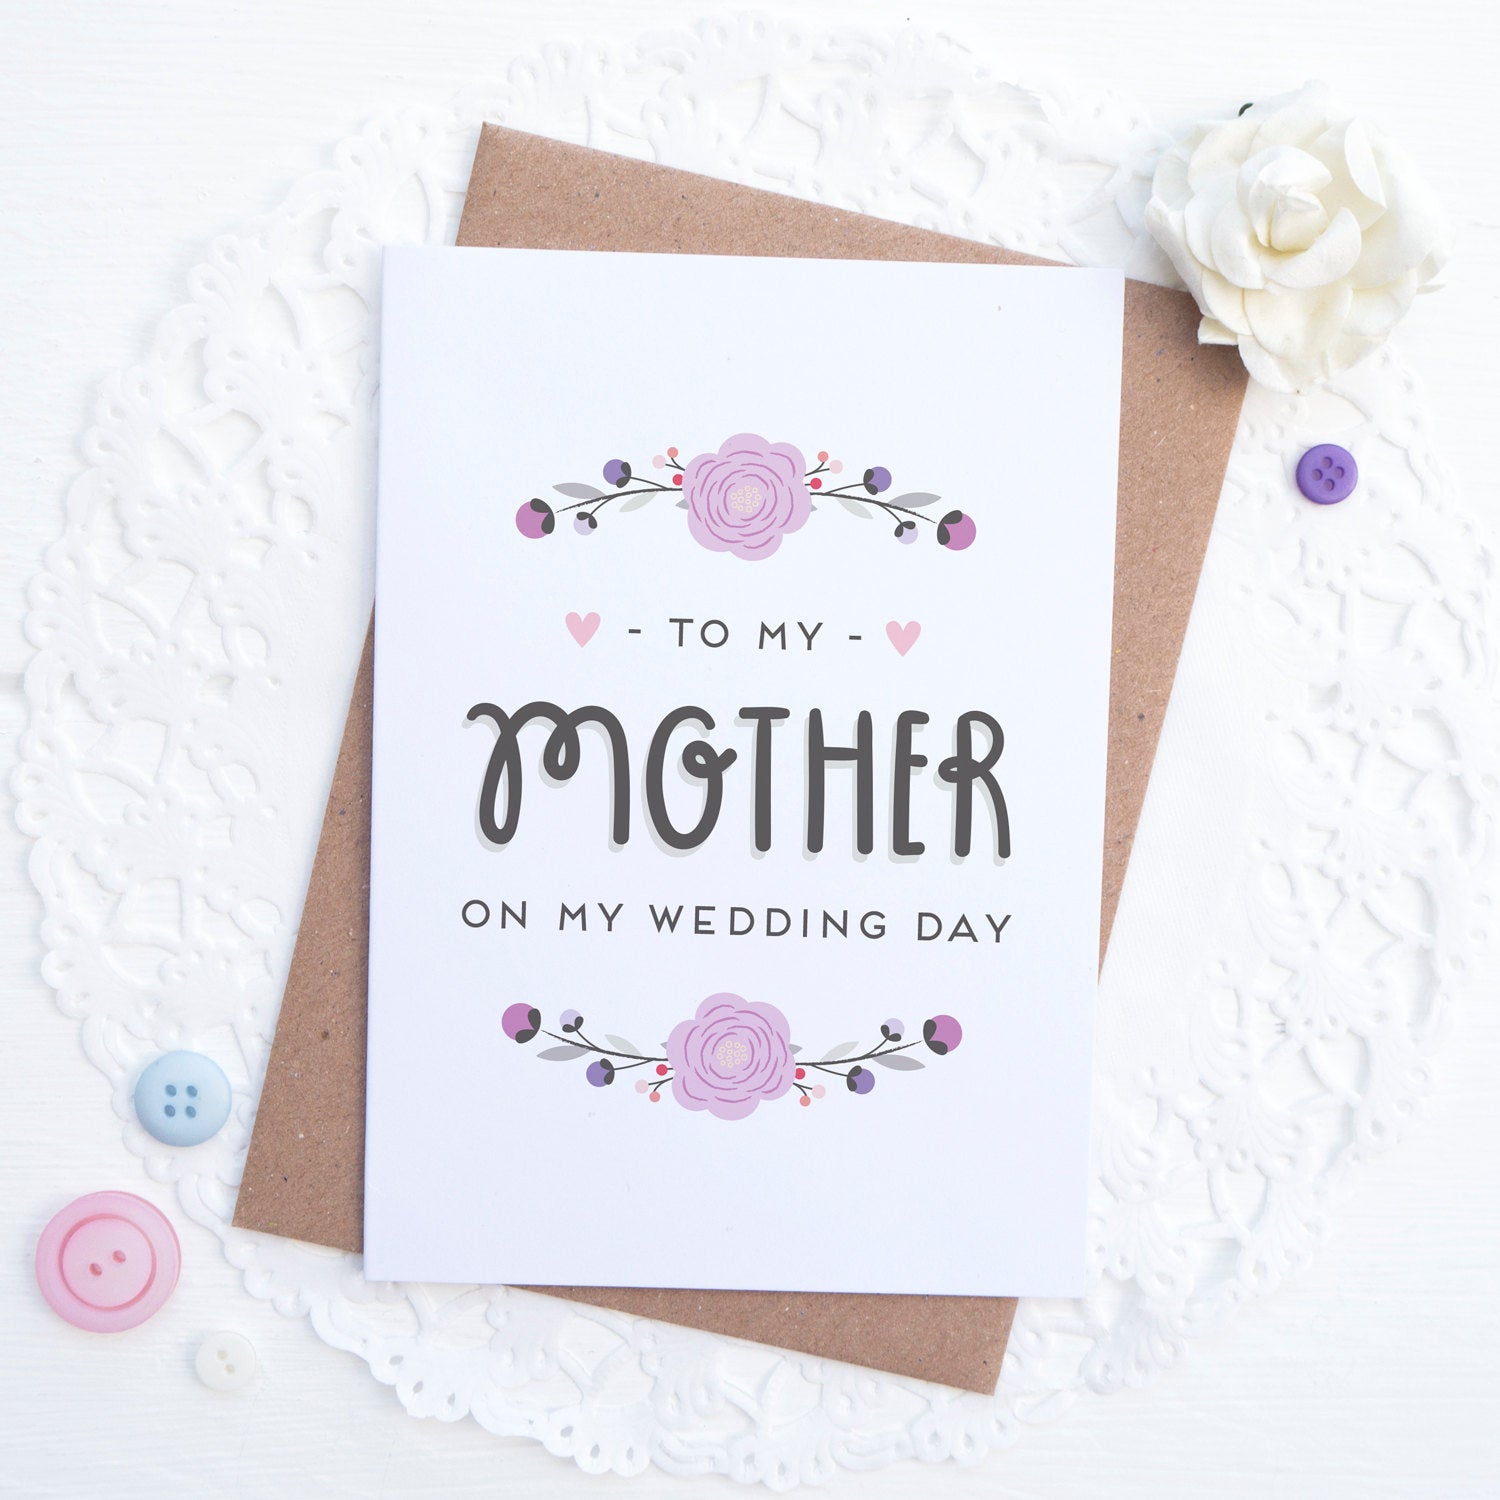 To my mother on my wedding day card in purple